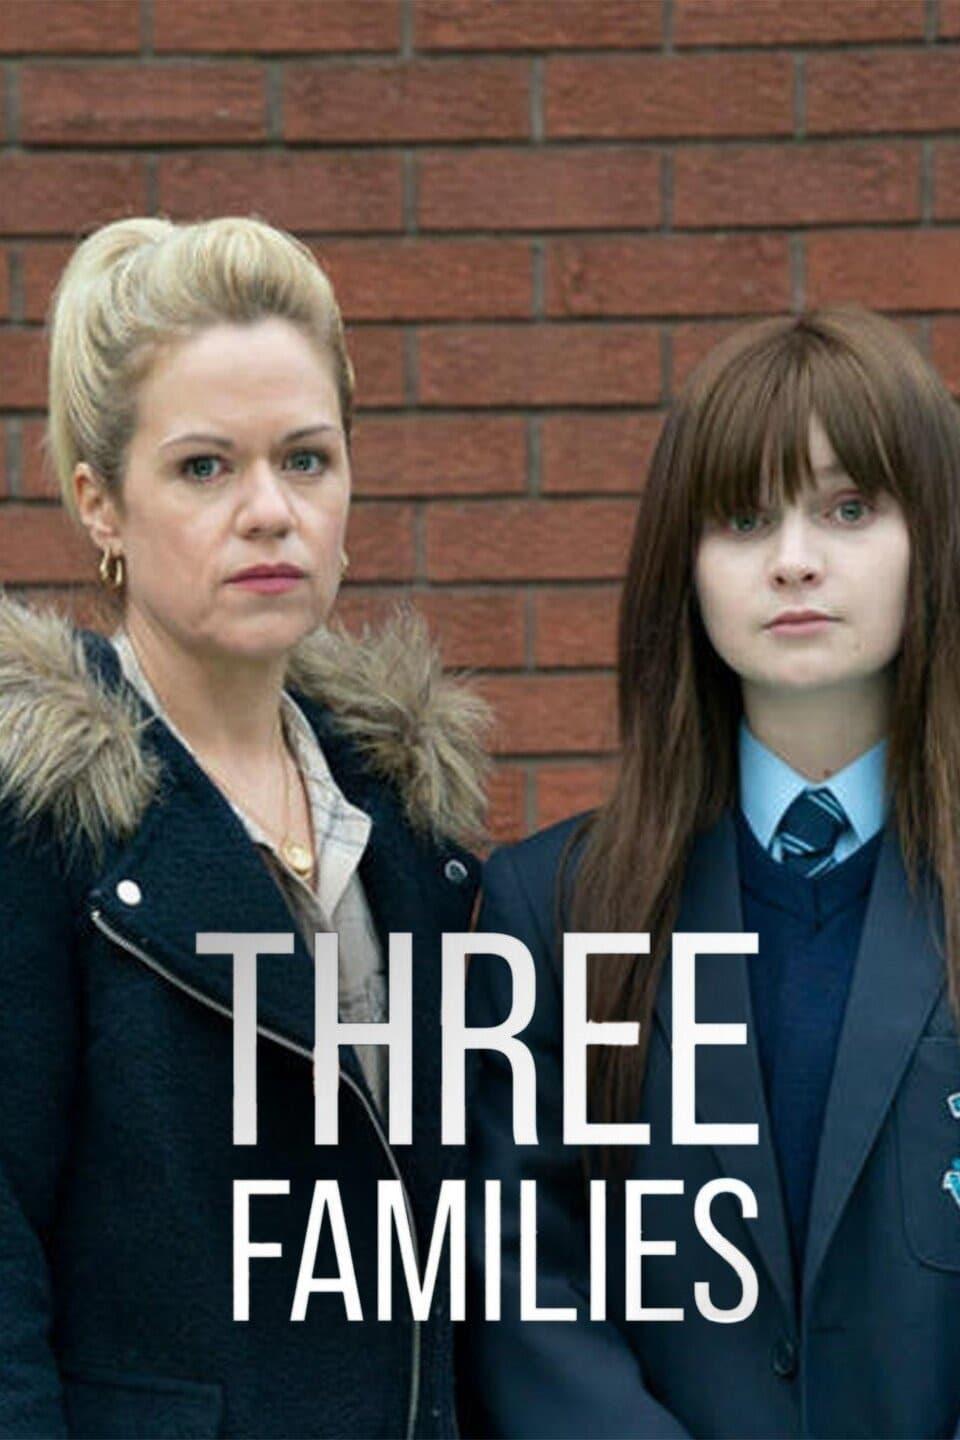 Three Families poster